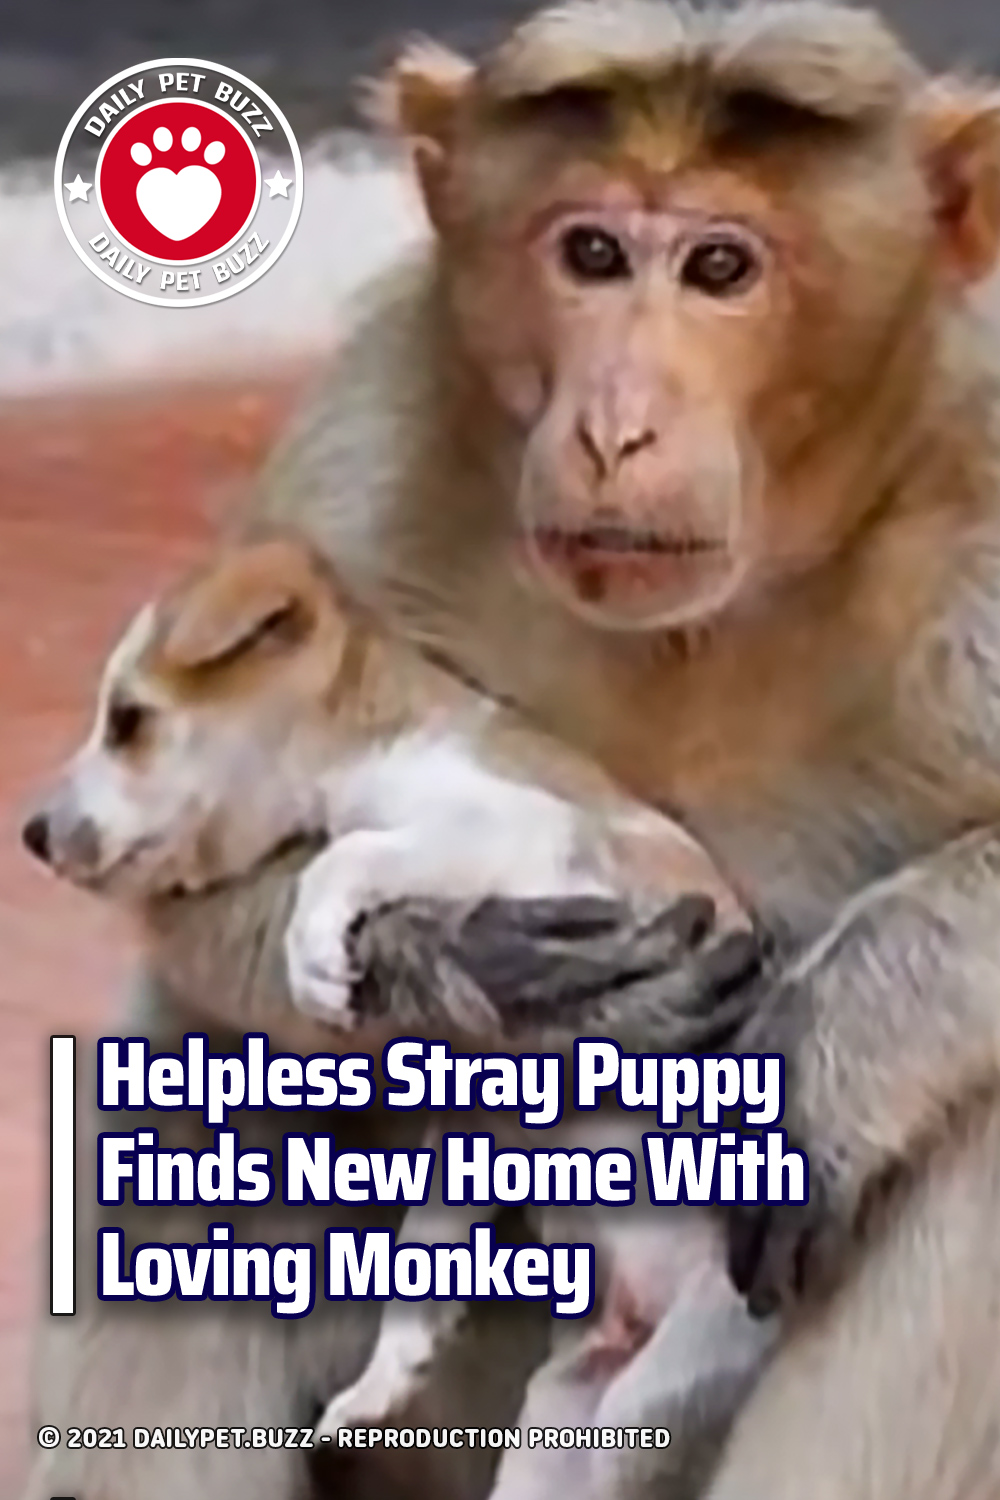 Helpless Stray Puppy Finds New Home With Loving Monkey